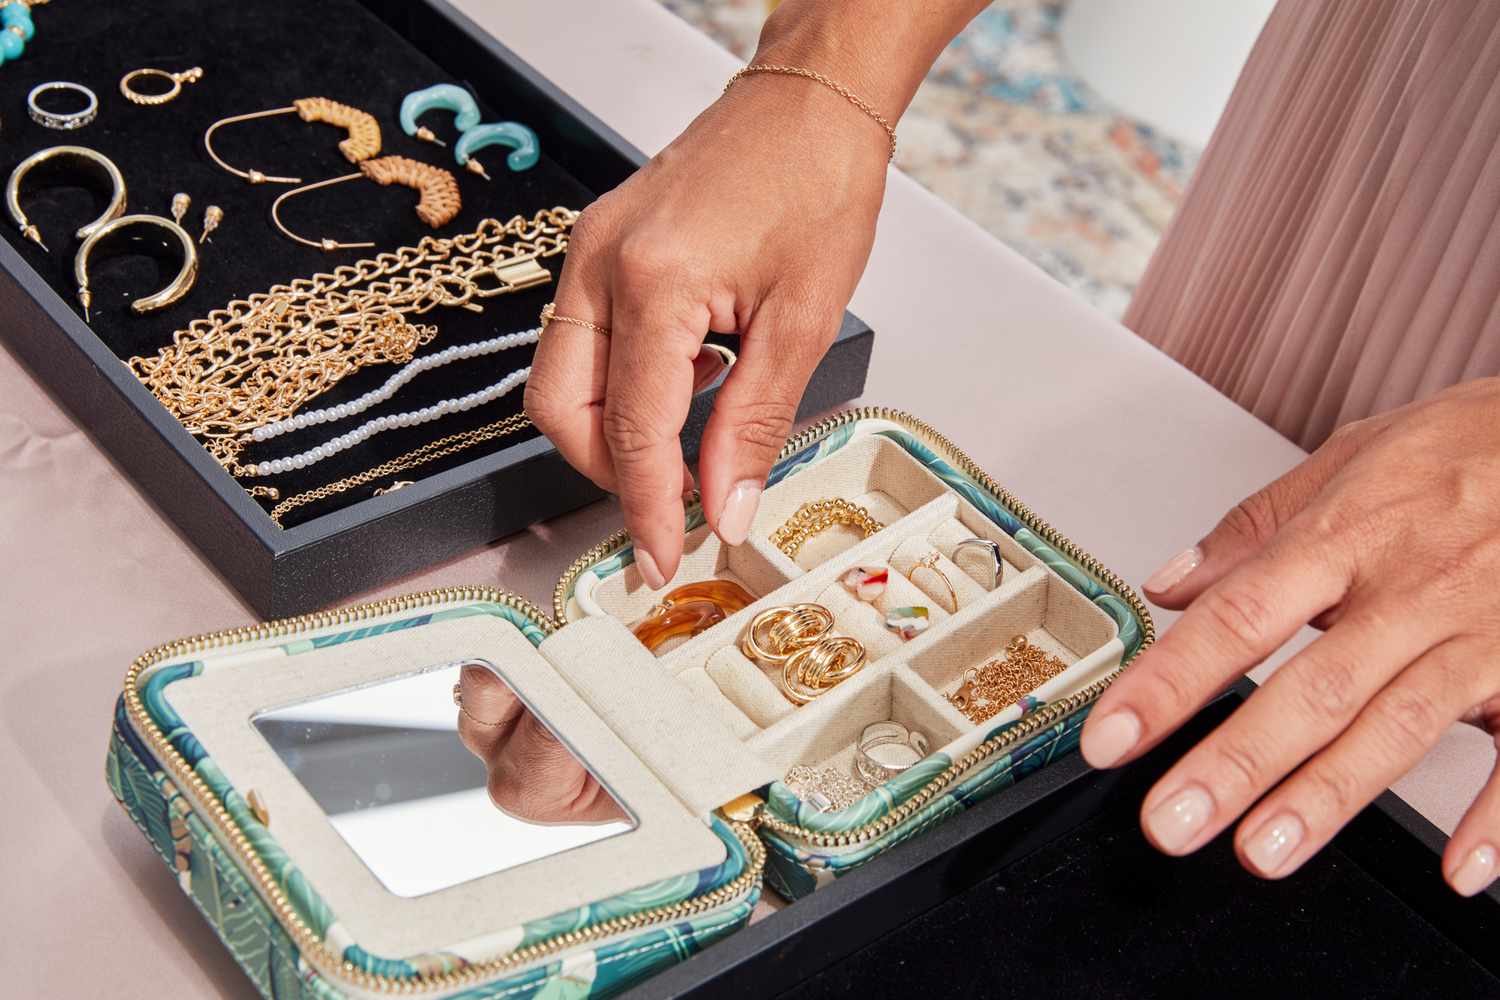 A person putting jewelry into the Mark & Graham Small Travel Jewelry Case.